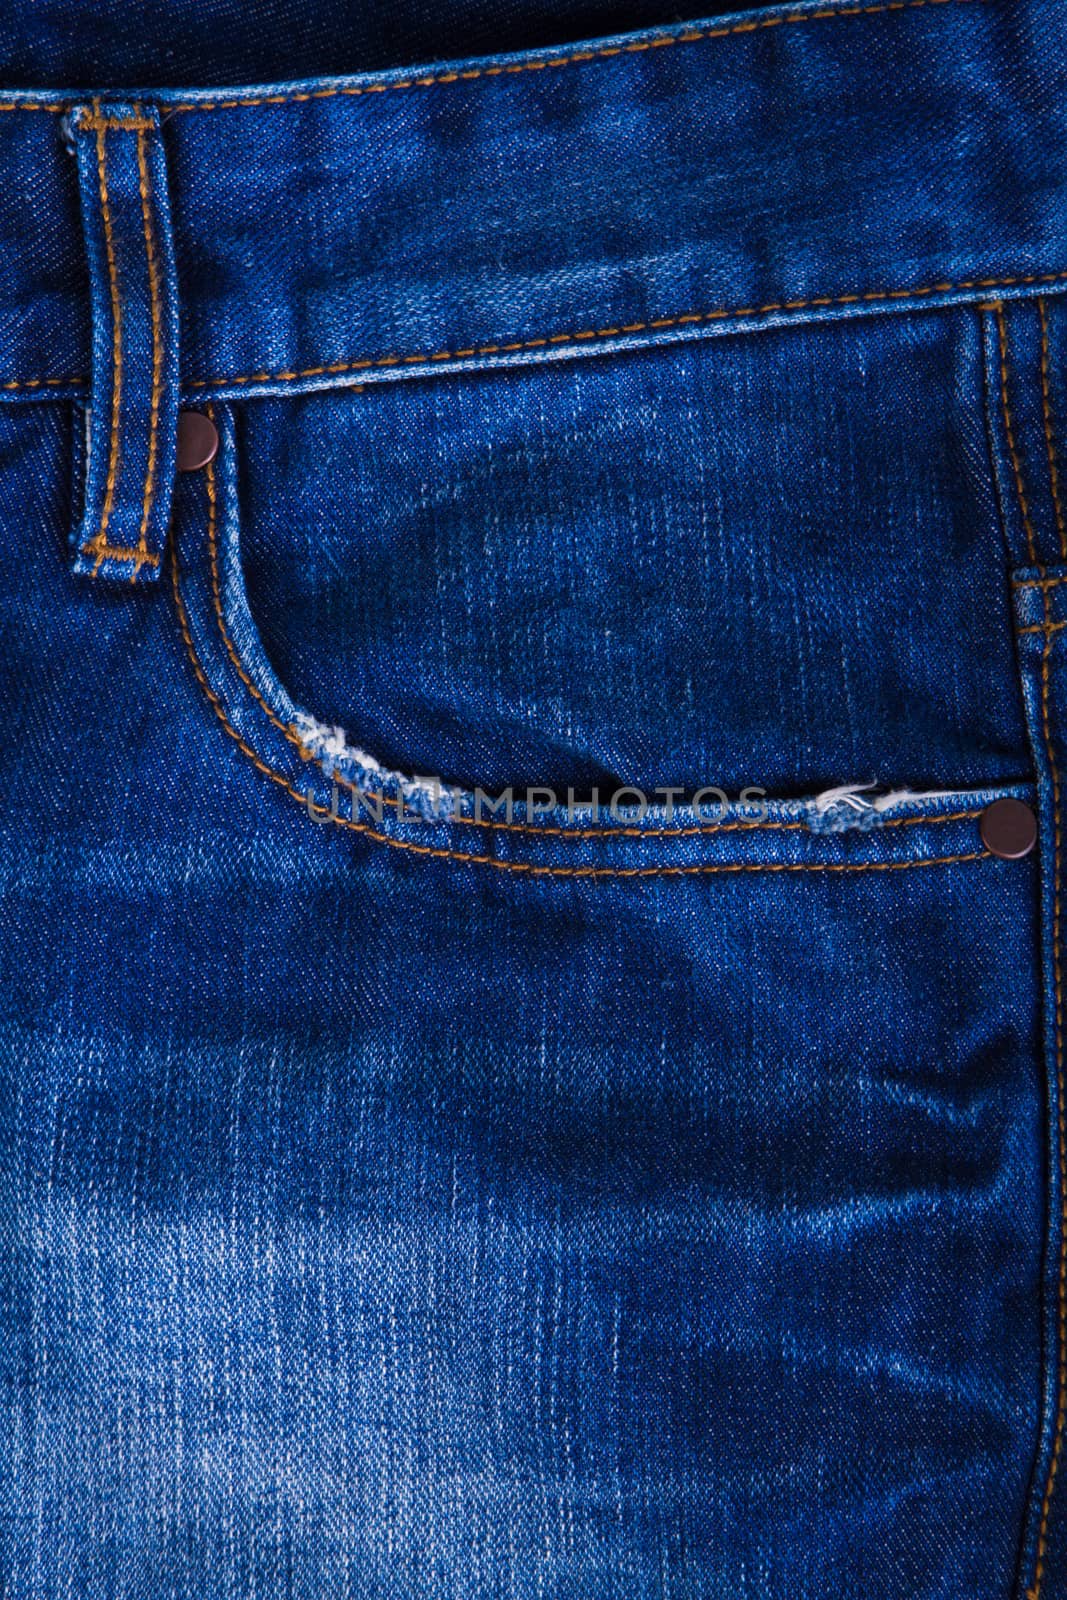 Jeans pocket in close up - Stock Images